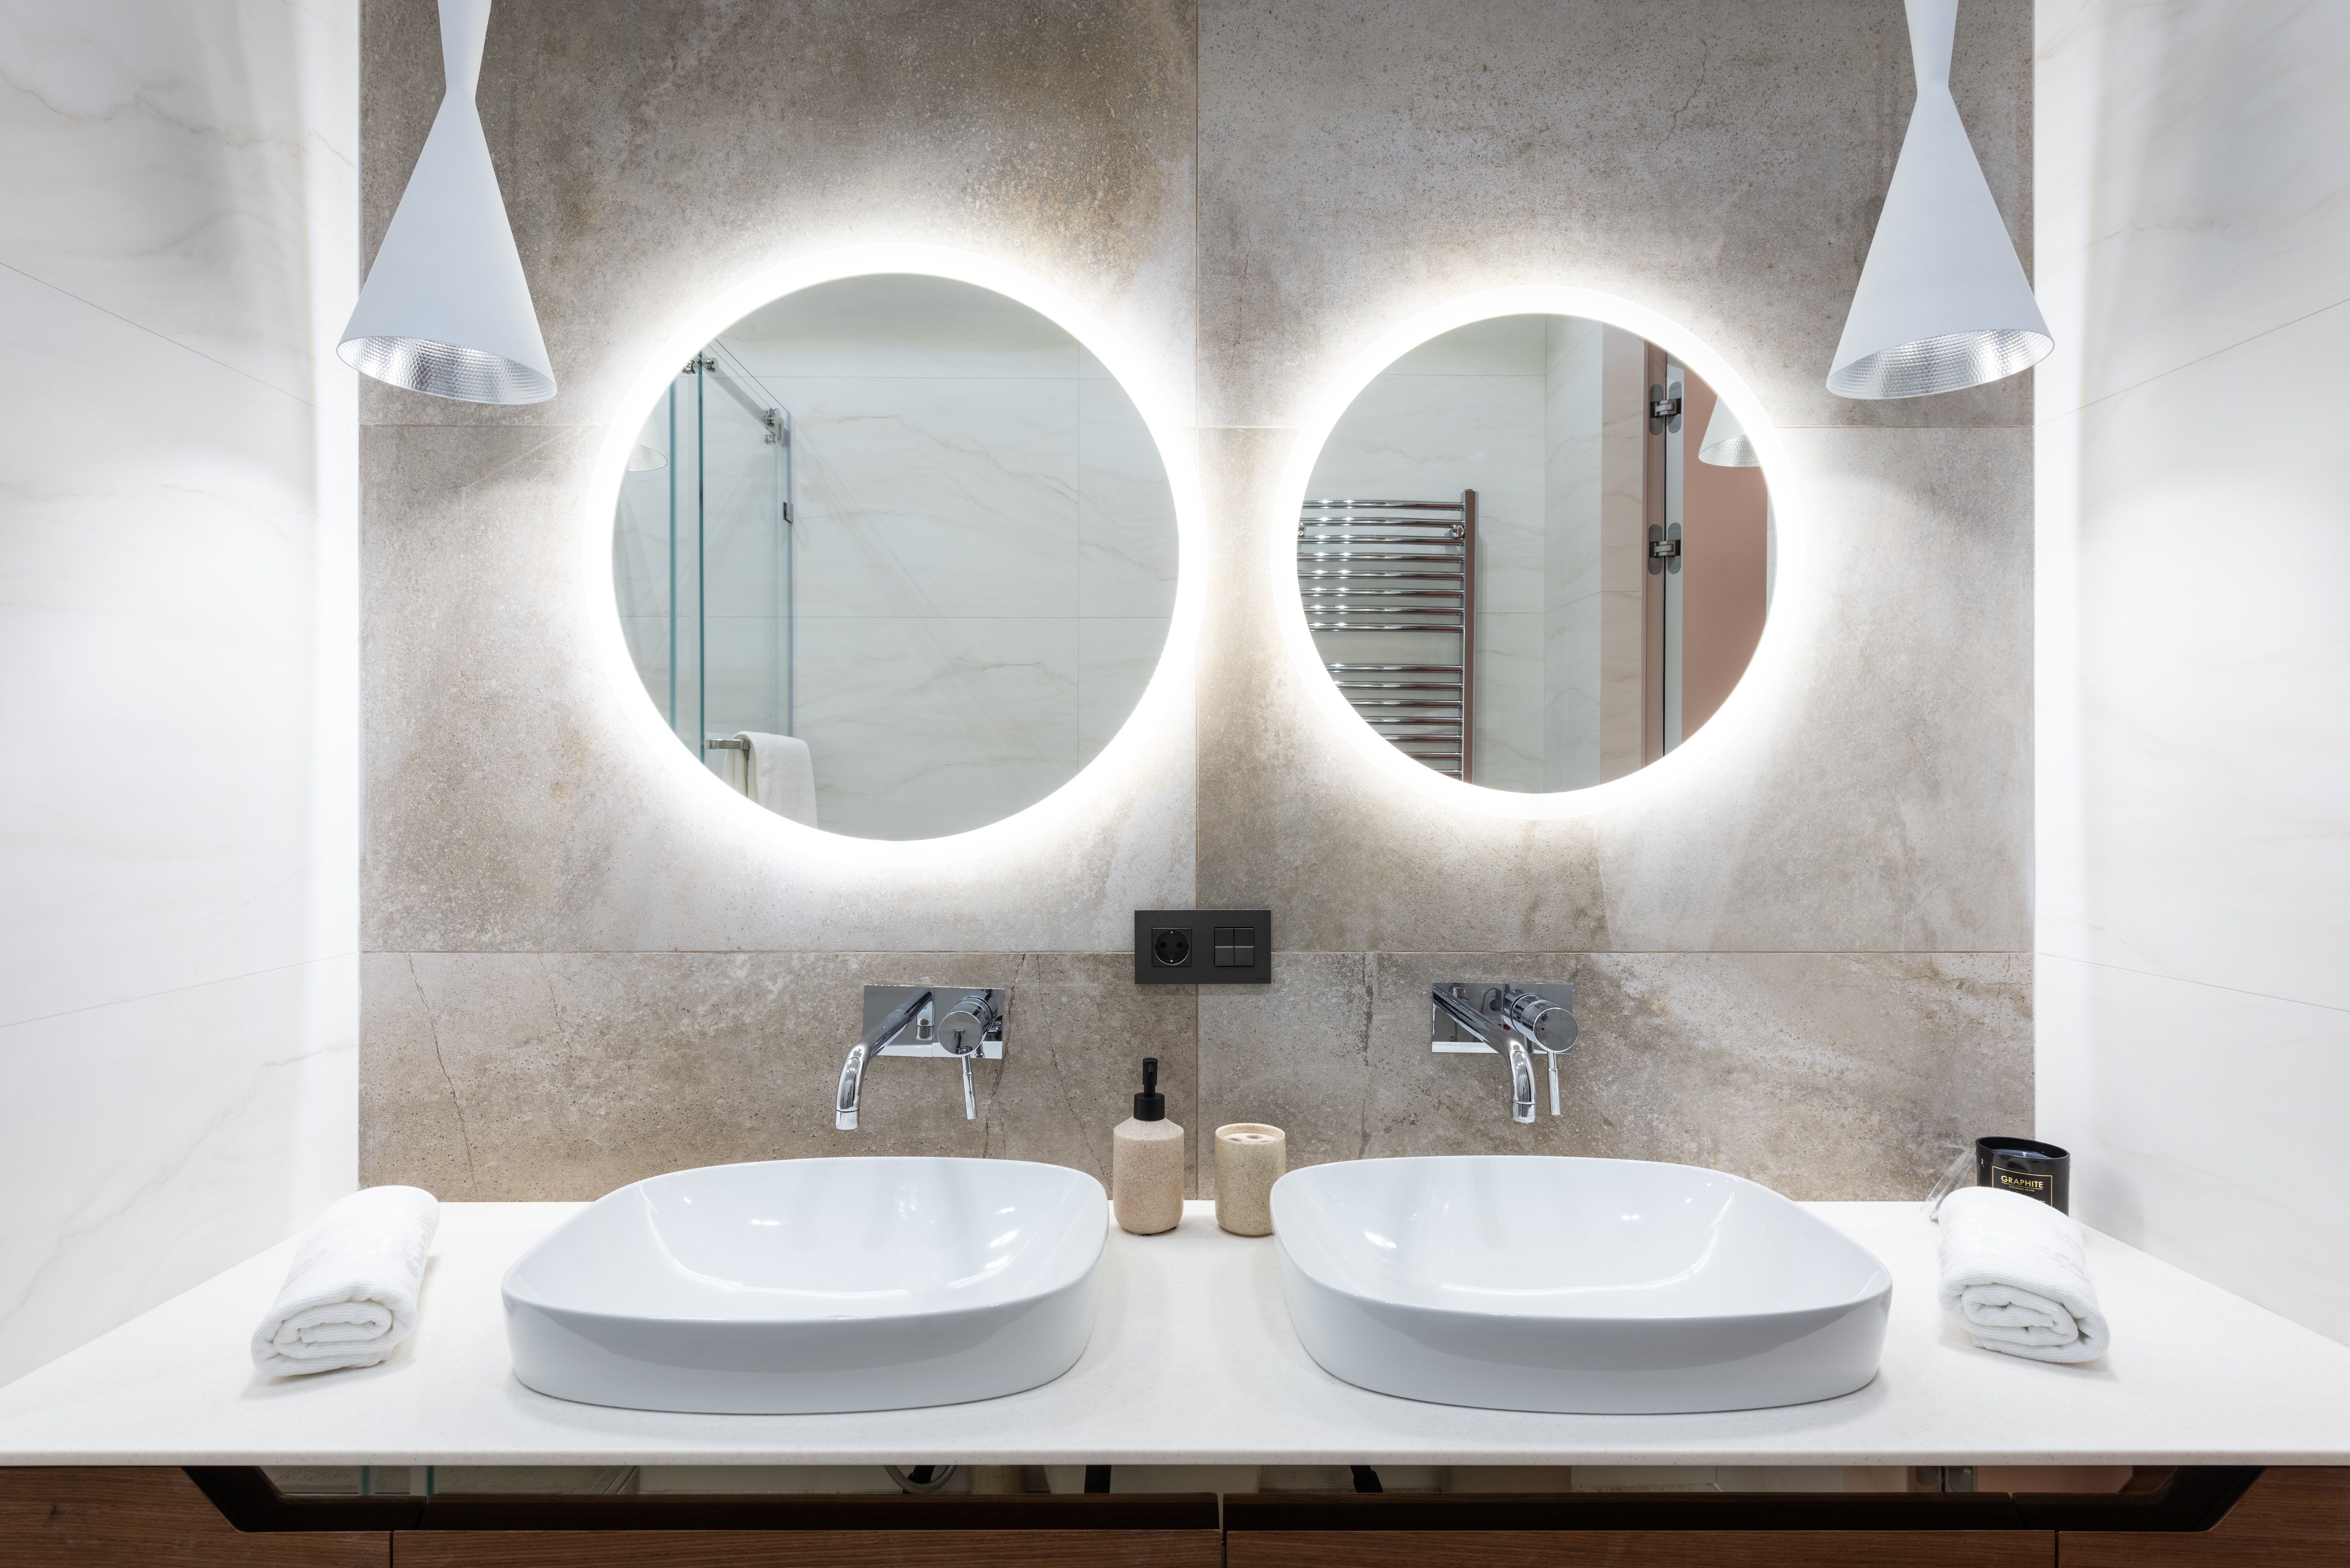 https://www.hampshirelight.net/storage/uploads/blogs/how-to-light-your-bathroom-effectively/pexels-max-vakhtbovych-6186825_yqzdc.jpg